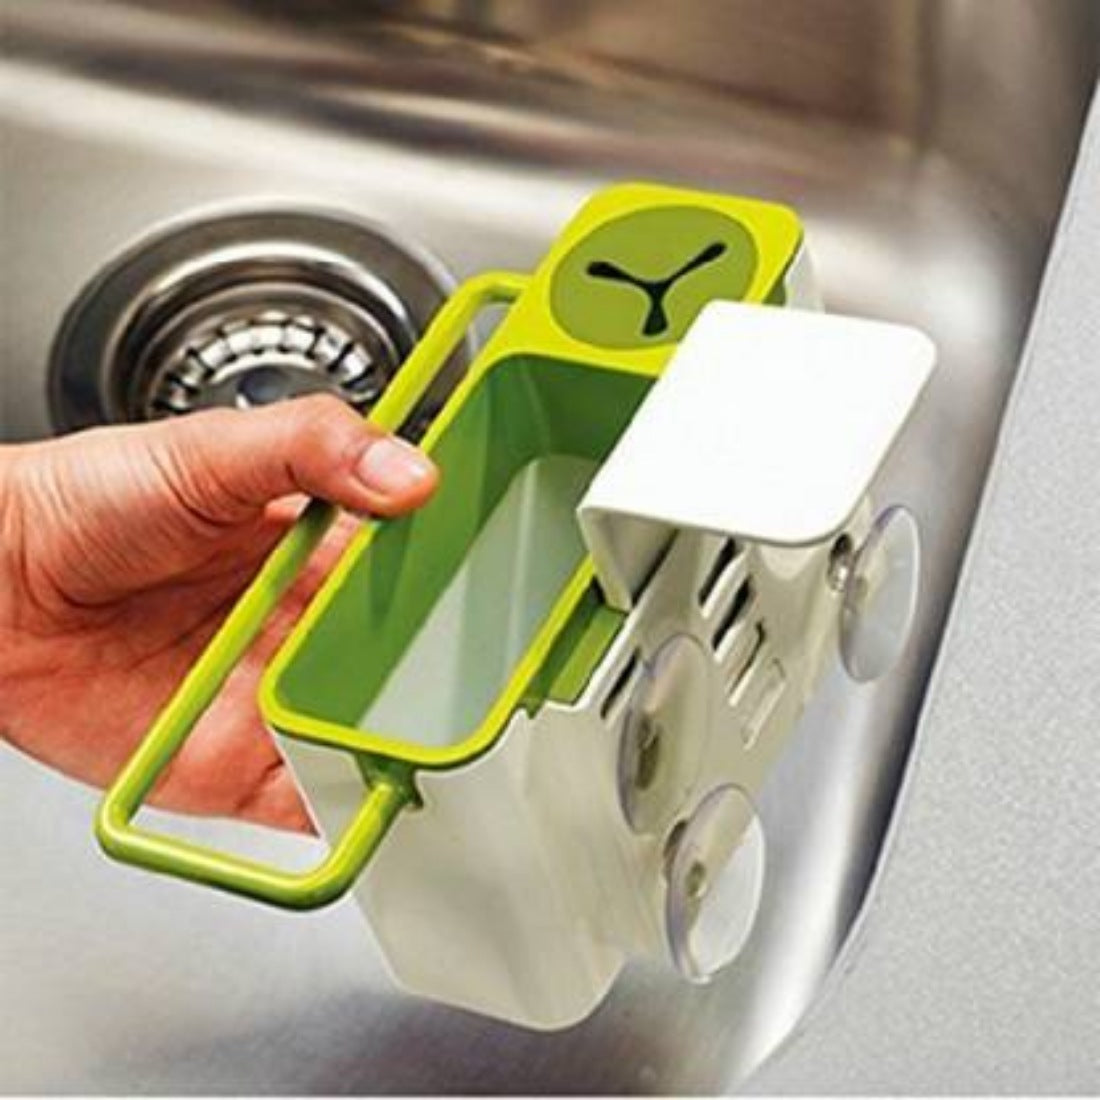 Generic Kitchen Self Draining Sink Tidy With Suction Cup Organizer Sponge